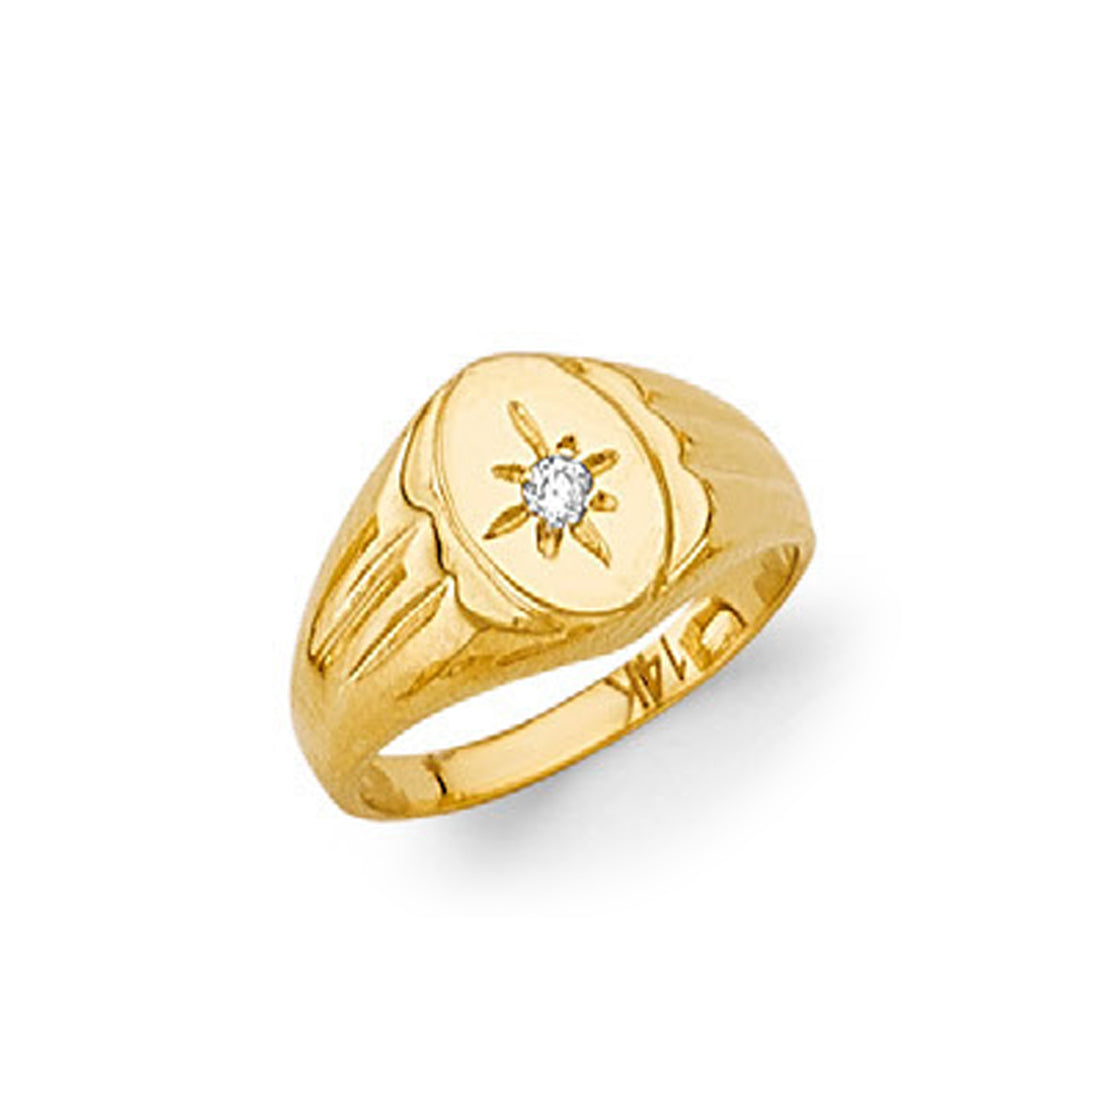 CZ Hollywood Striped Signet Ring in Solid Gold 